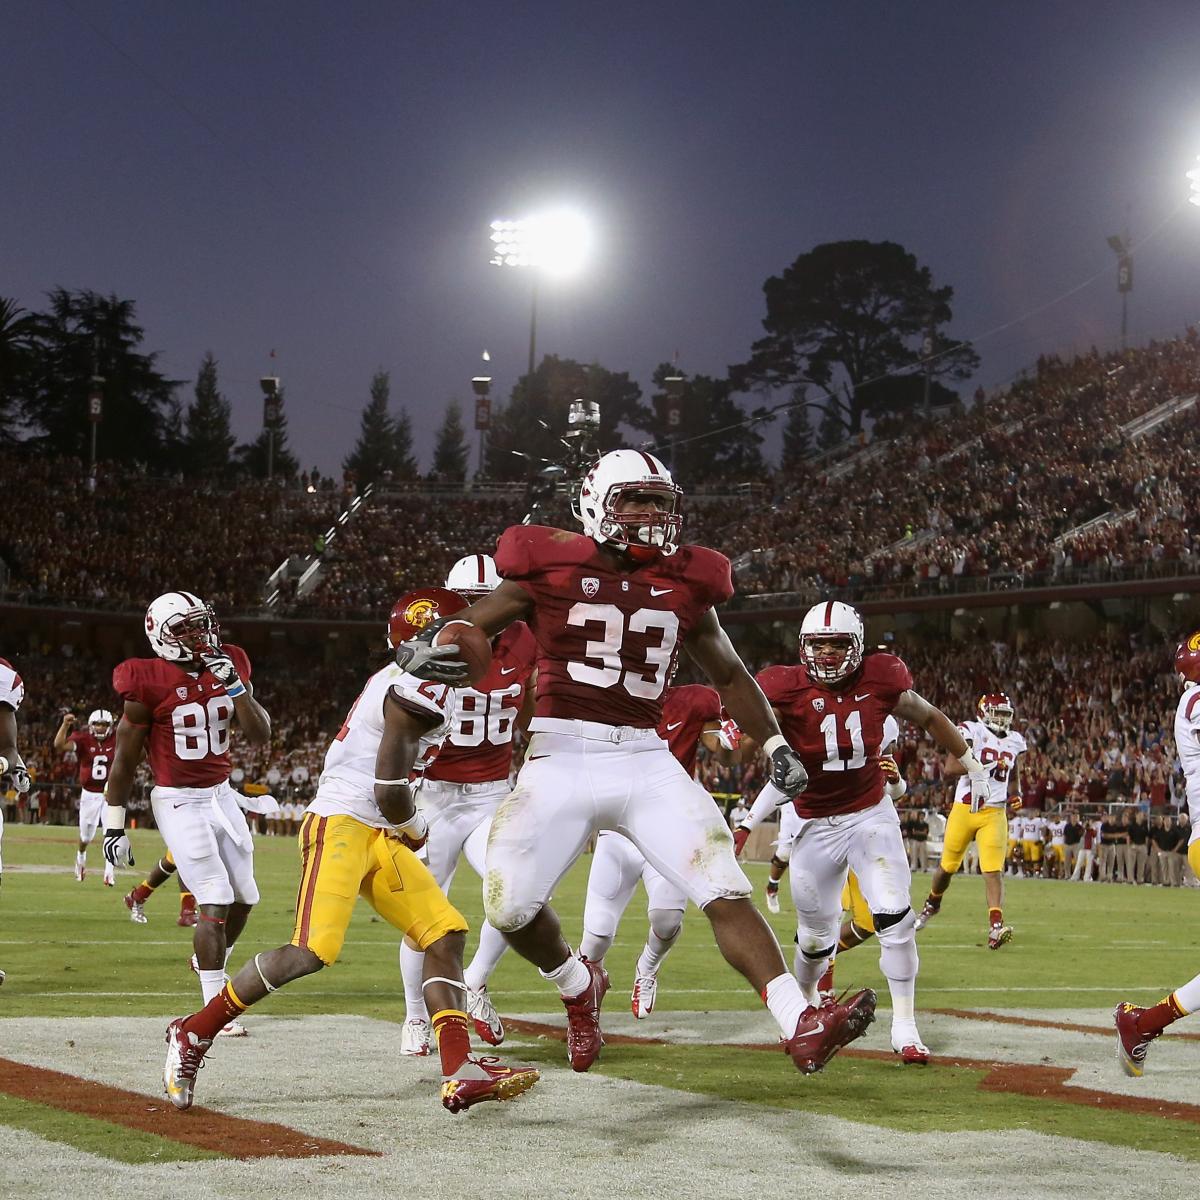 2012 College Football Rankings USC to Fall in Week 3 AP and USA Today